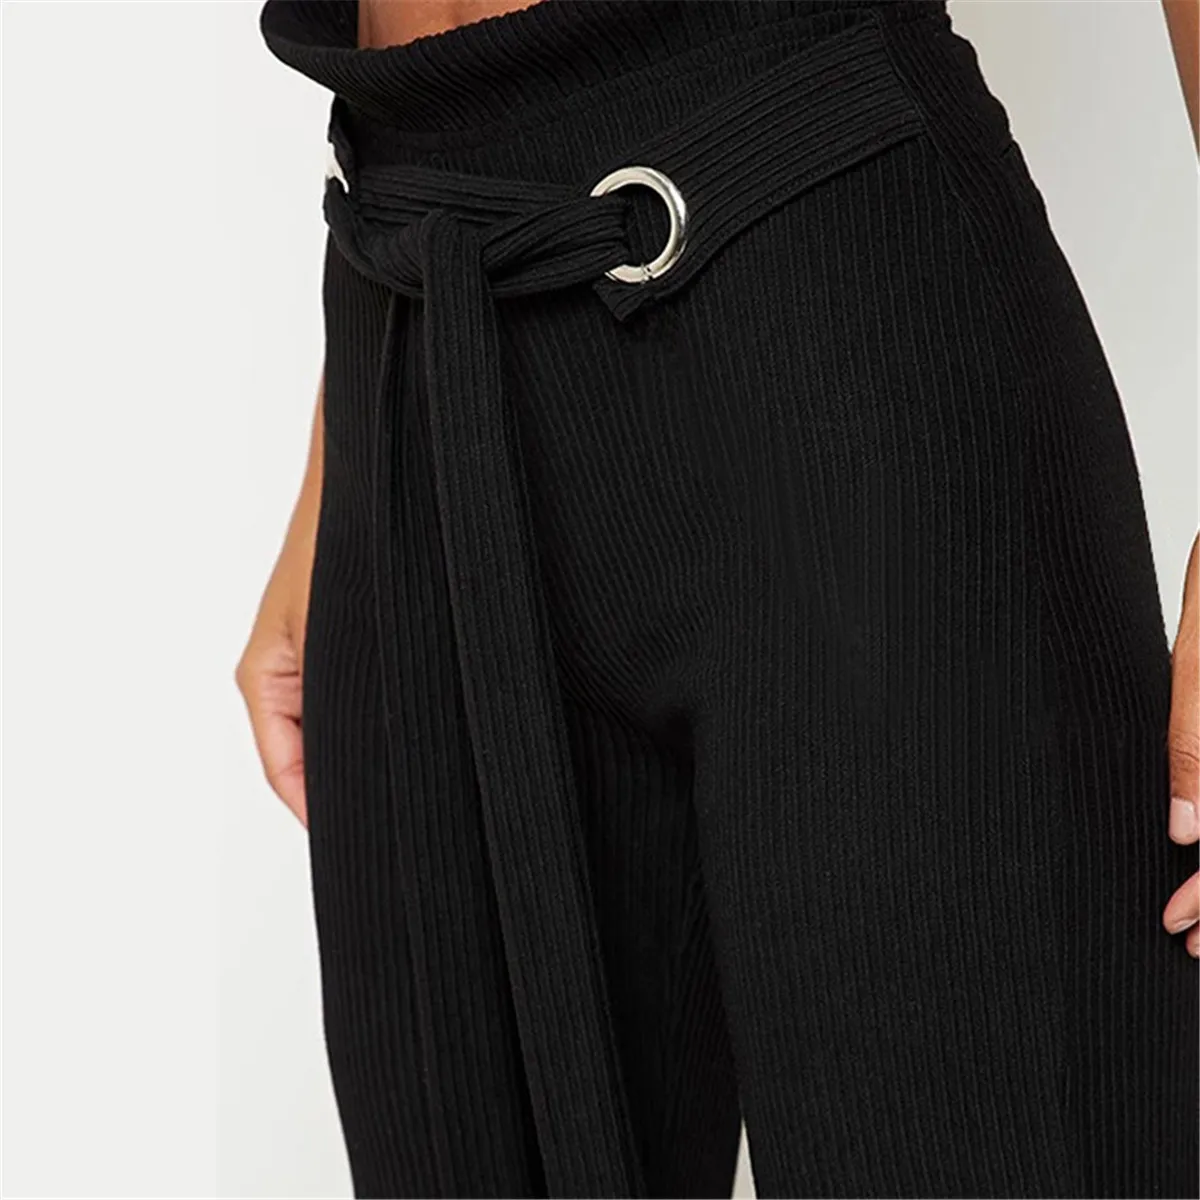 

Women's High Waist Casual Drawstring Wide Leg Pants Casual Bottom Slit Bell Bandage Lace Up Waistband Corduroy Flared Trousers